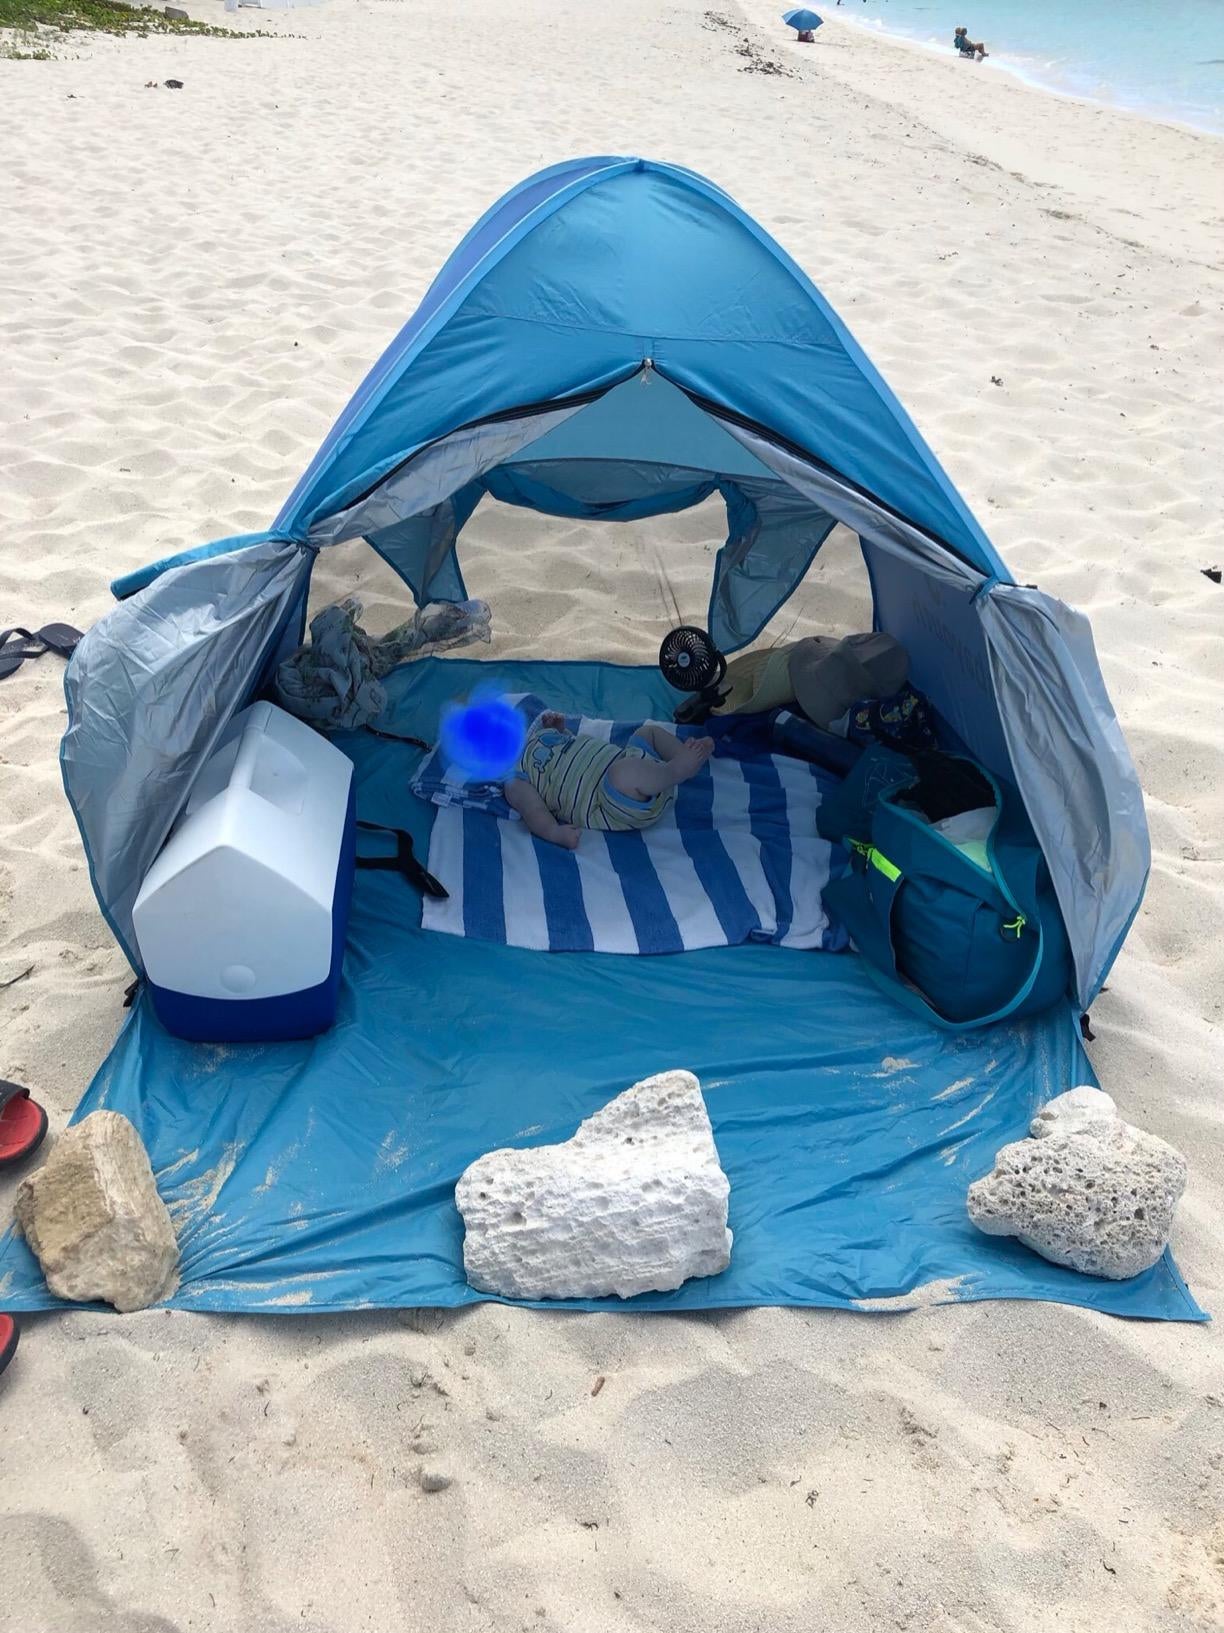 hotel customer picture of the blue camping tent at the beach